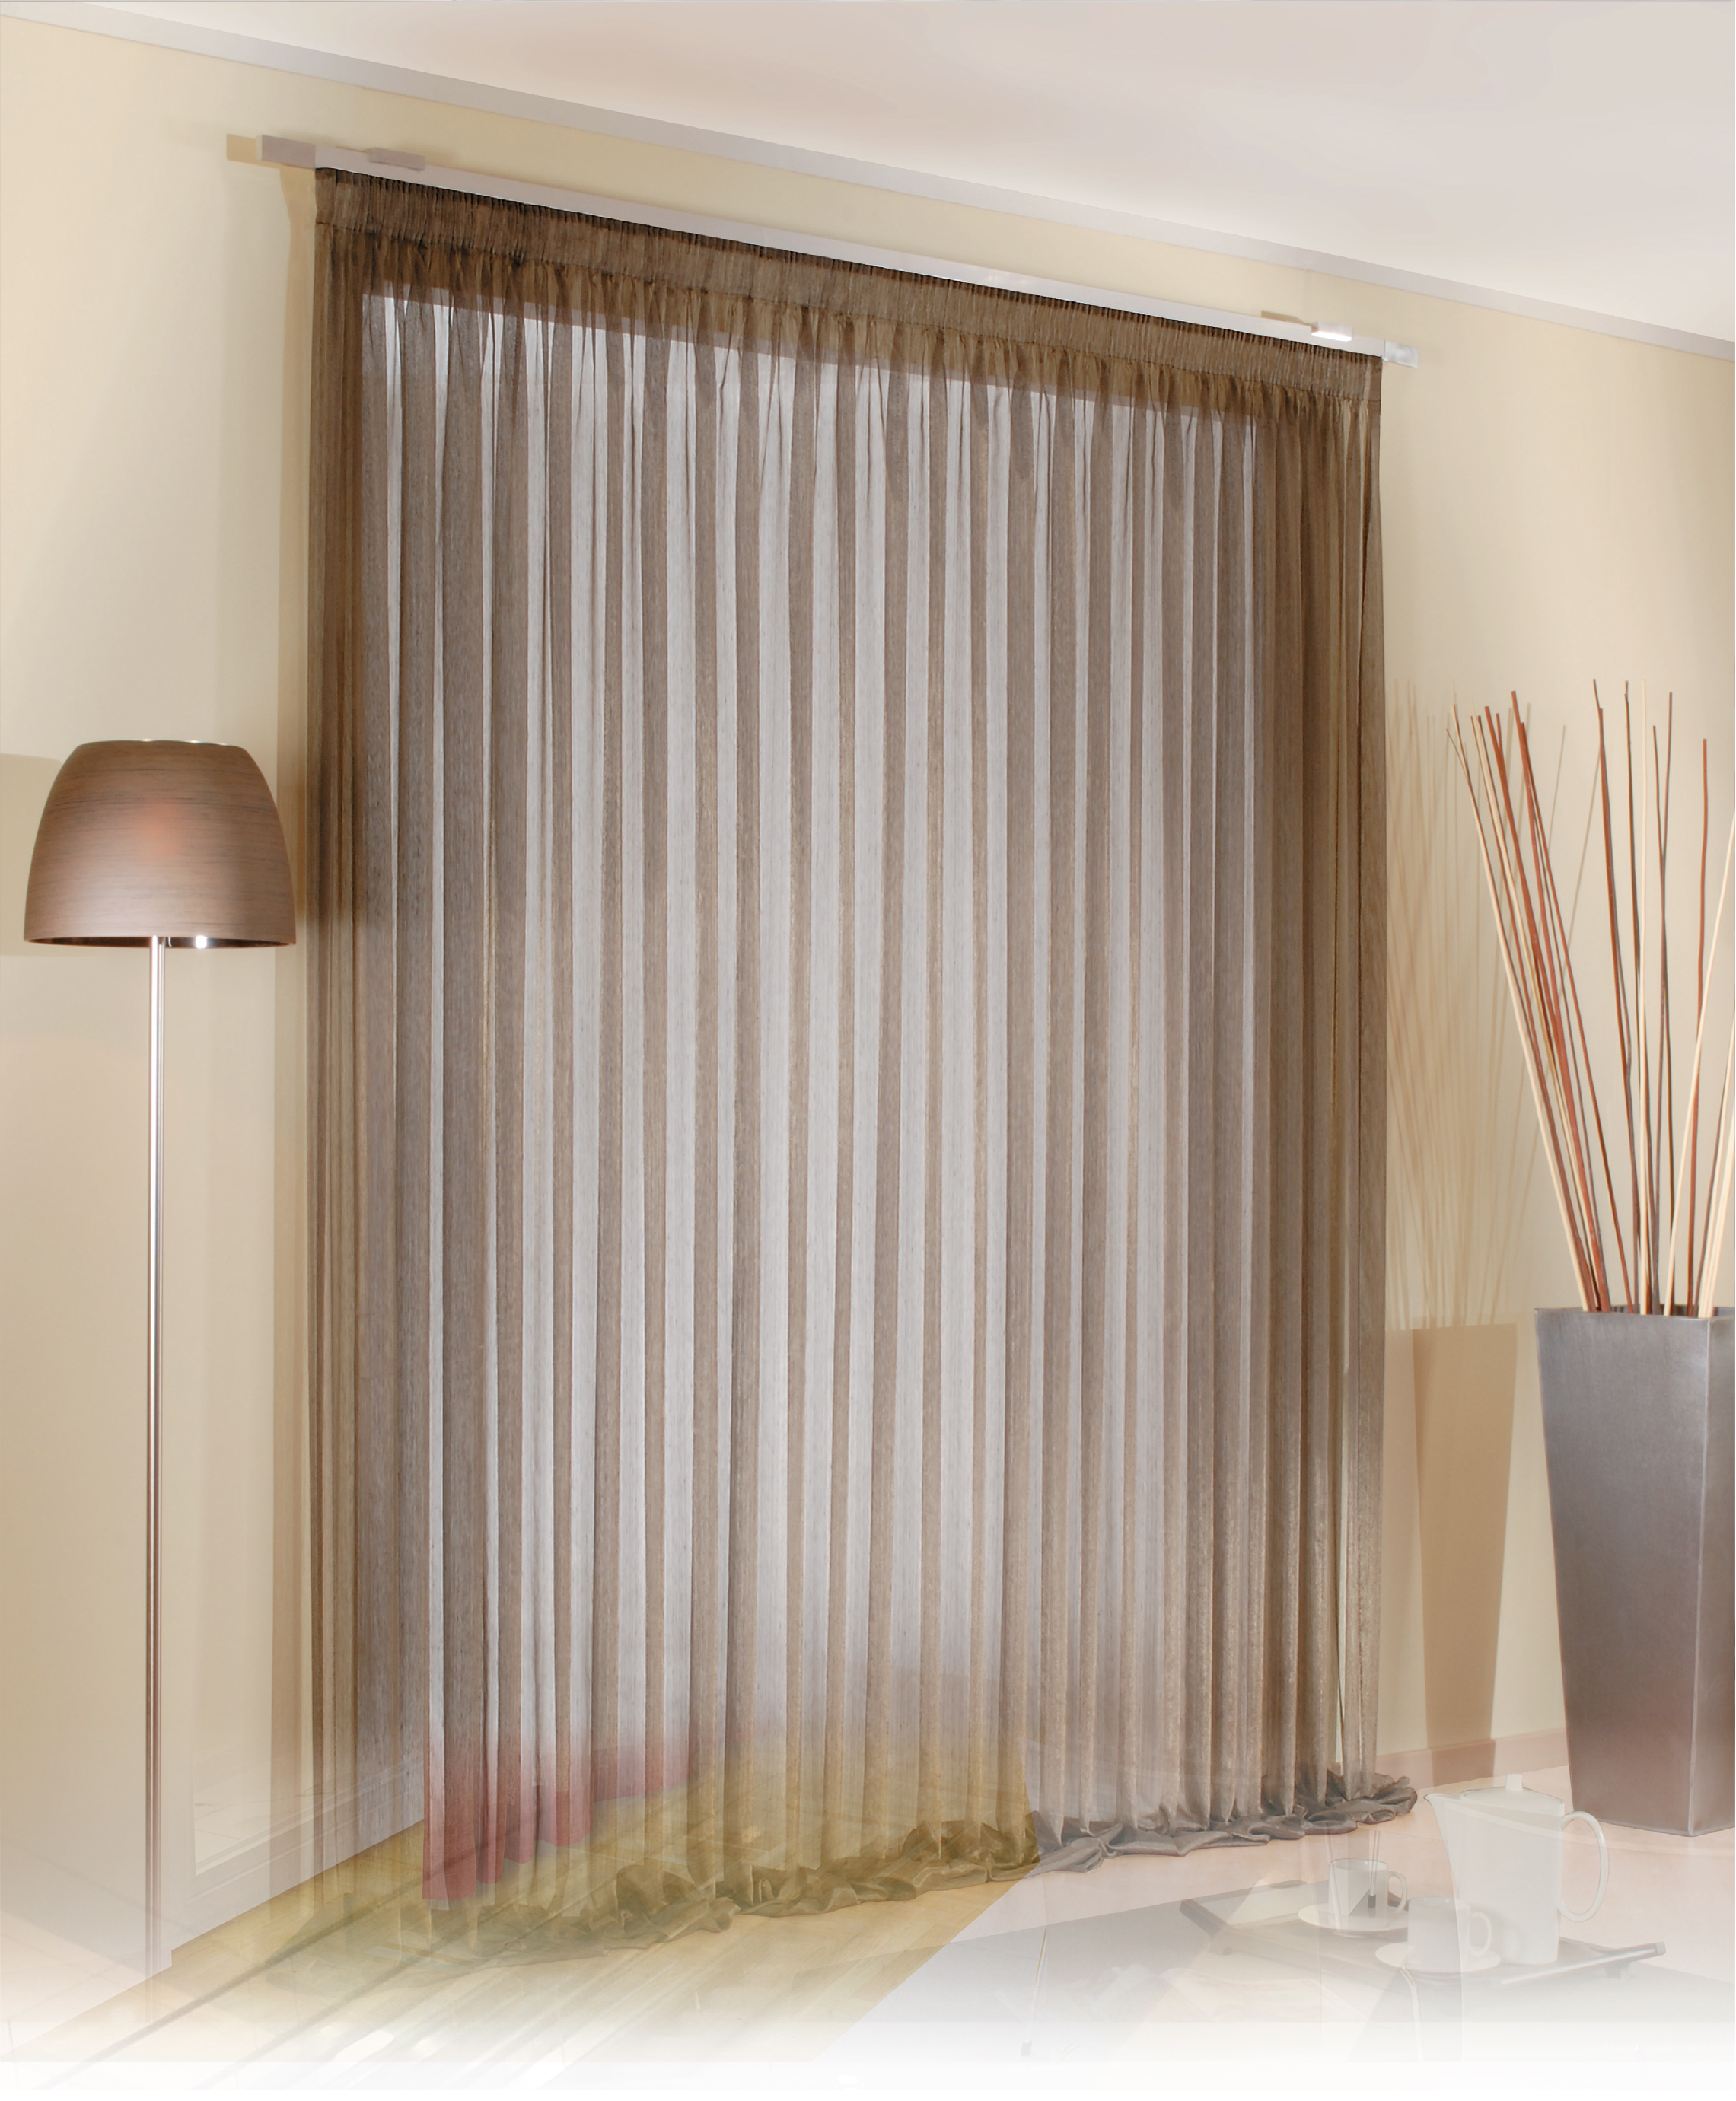 What key considerations must you know while buying motorized blinds or electric curtains?